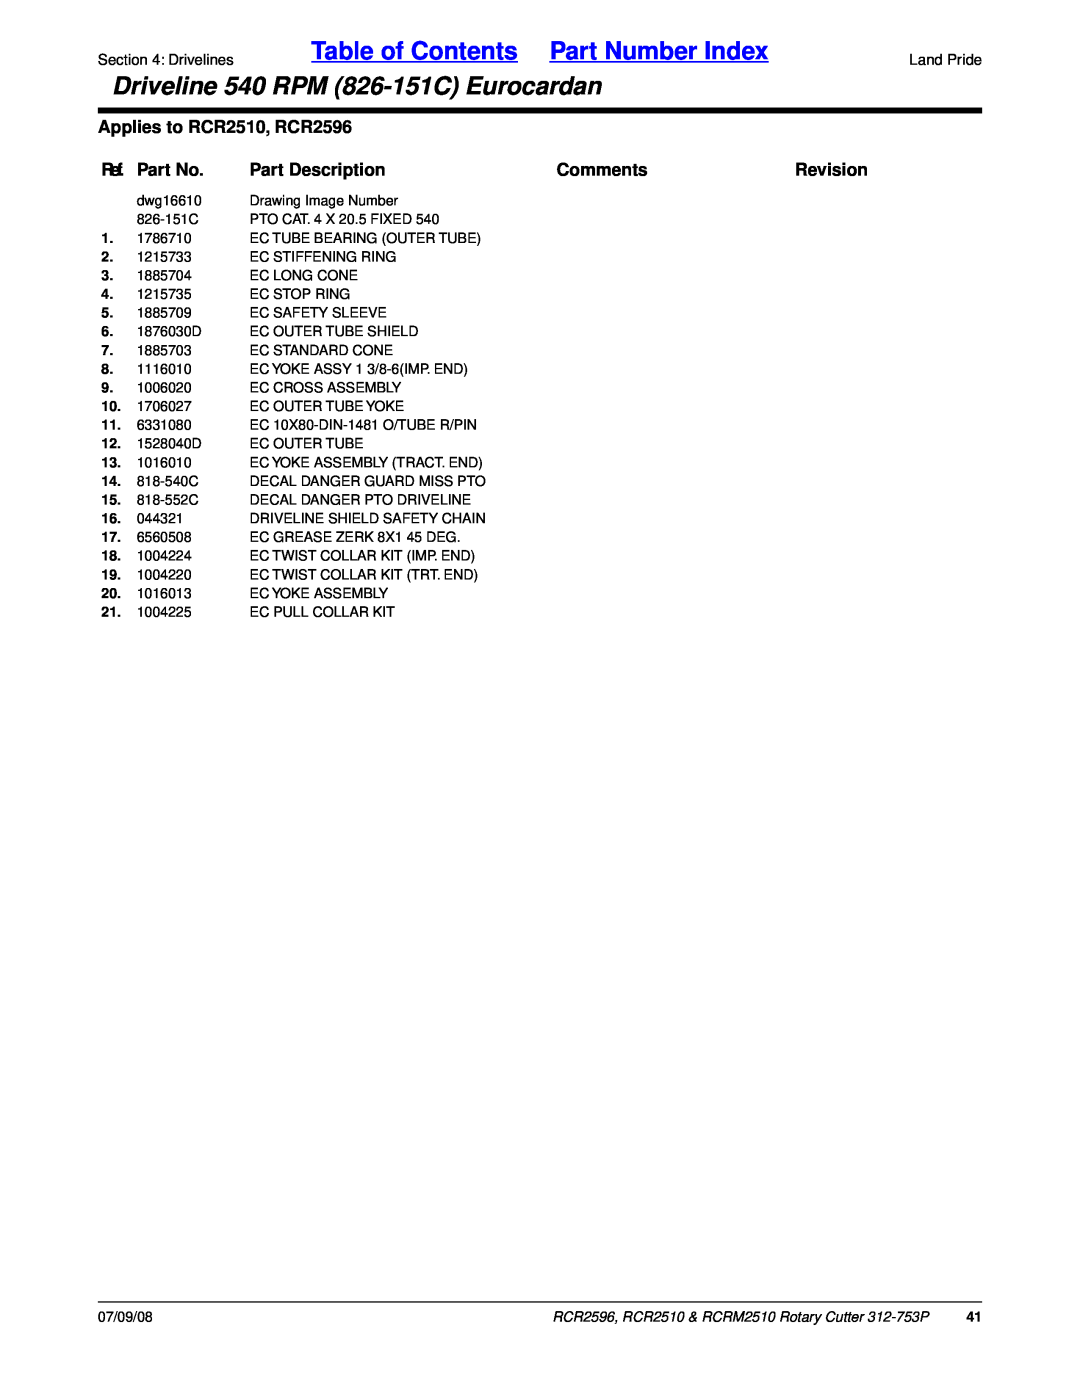 Land Pride manual Table of Contents Part Number Index, Driveline 540 RPM 826-151CEurocardan, Applies to RCR2510, RCR2596 